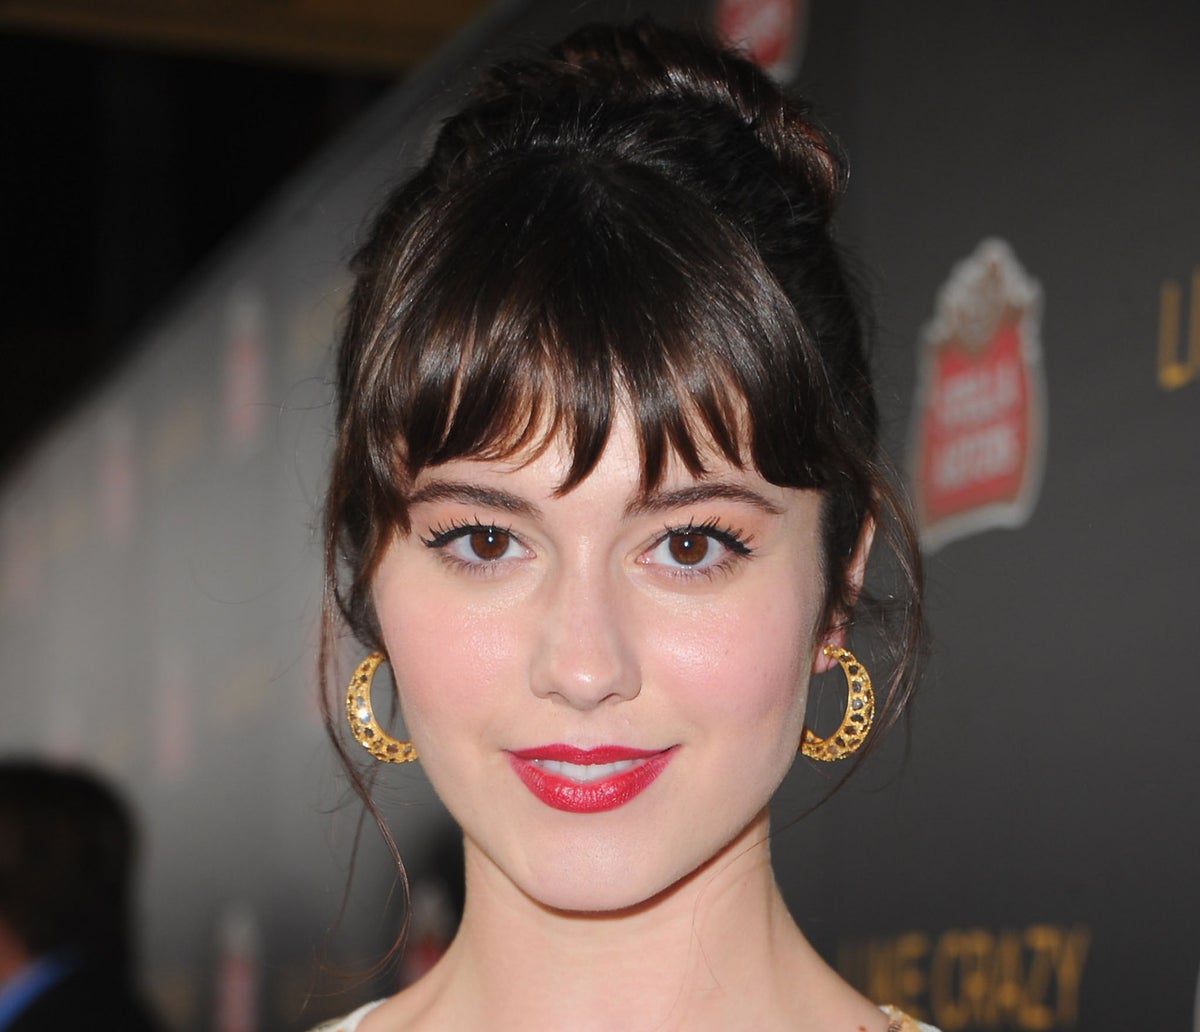 andrew lajoie share mary e winstead leaked photos